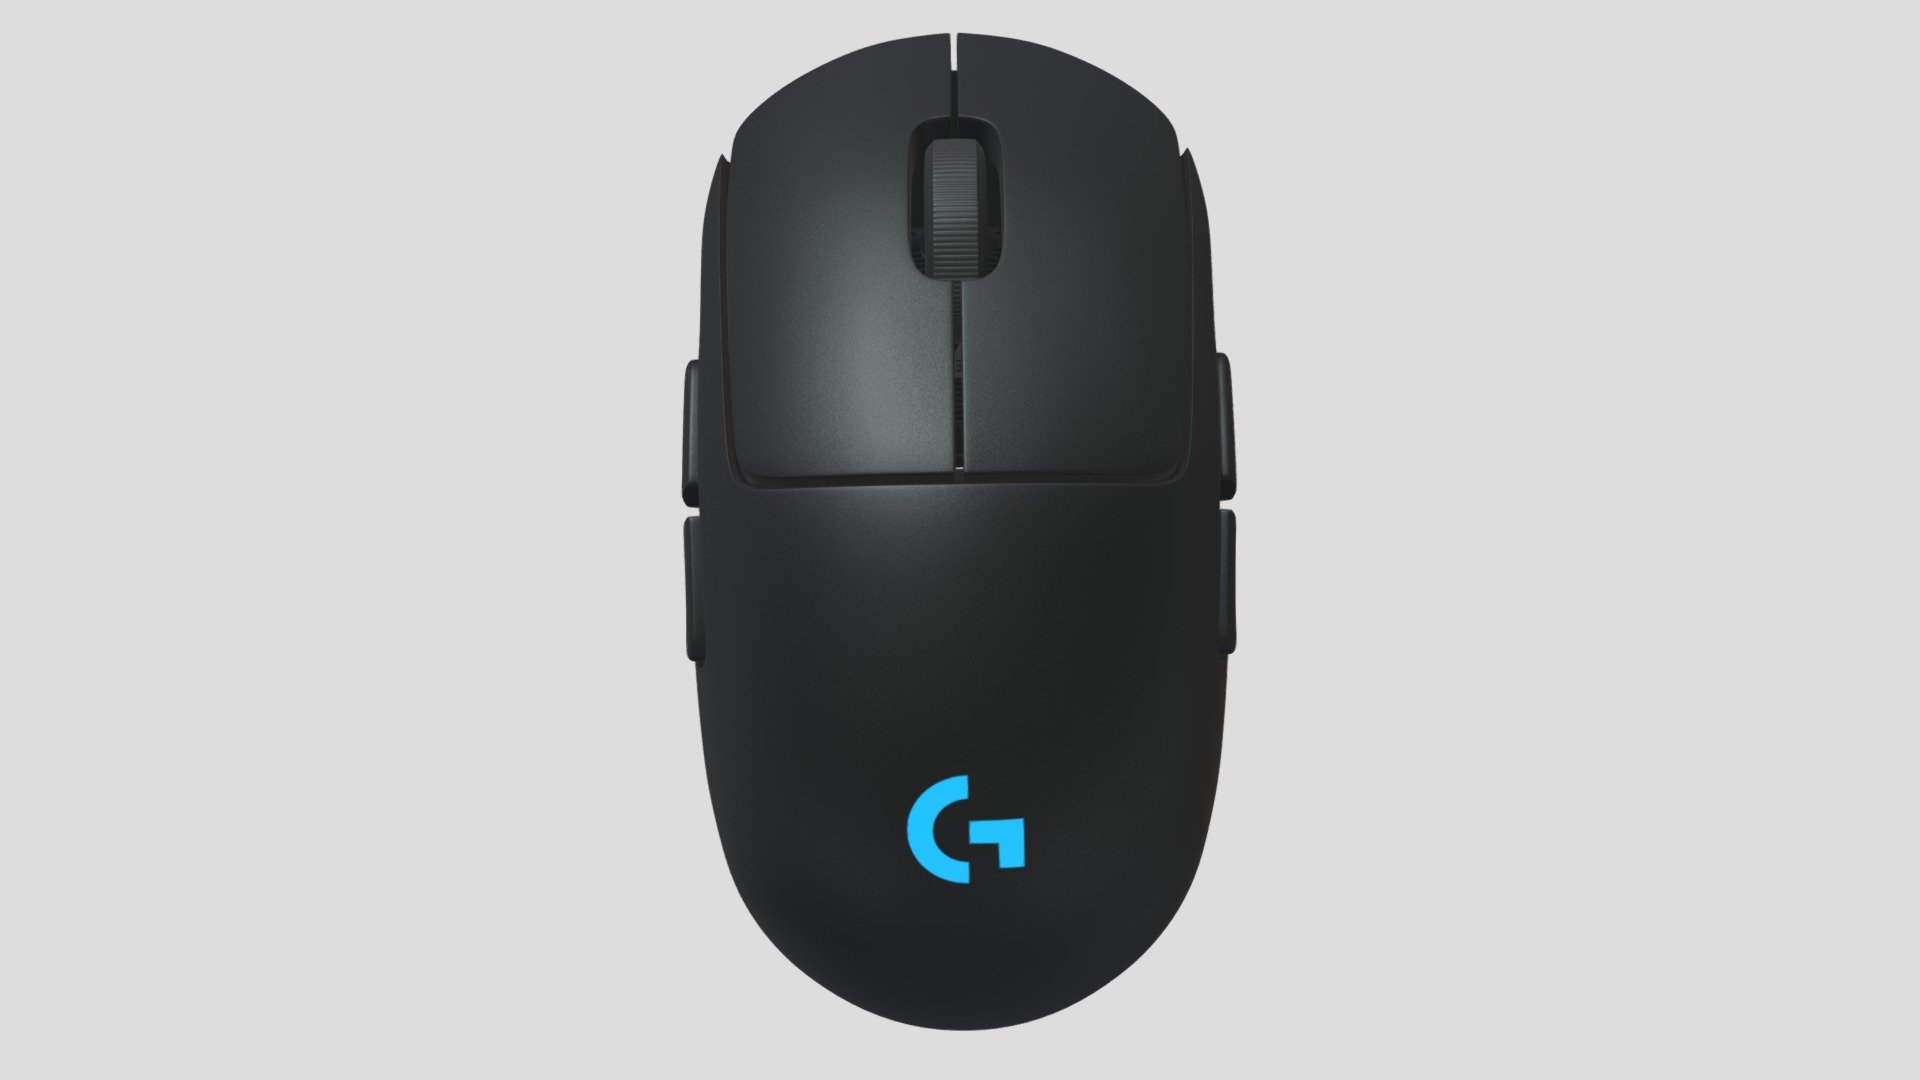 Highly detailed model of the Logitech G Pro 

All maps are 4K

-diffuse
-Roughness
-Metalness
-transmission
-Emmisive

5 formats

-OBJ
-FBX
-Blend
-STL
-x3d

Model is made and rendered in Blender with Cycles - Logitech G Pro Wireless - 3D model by Levi Abon (@Lance.Abon) 3d model